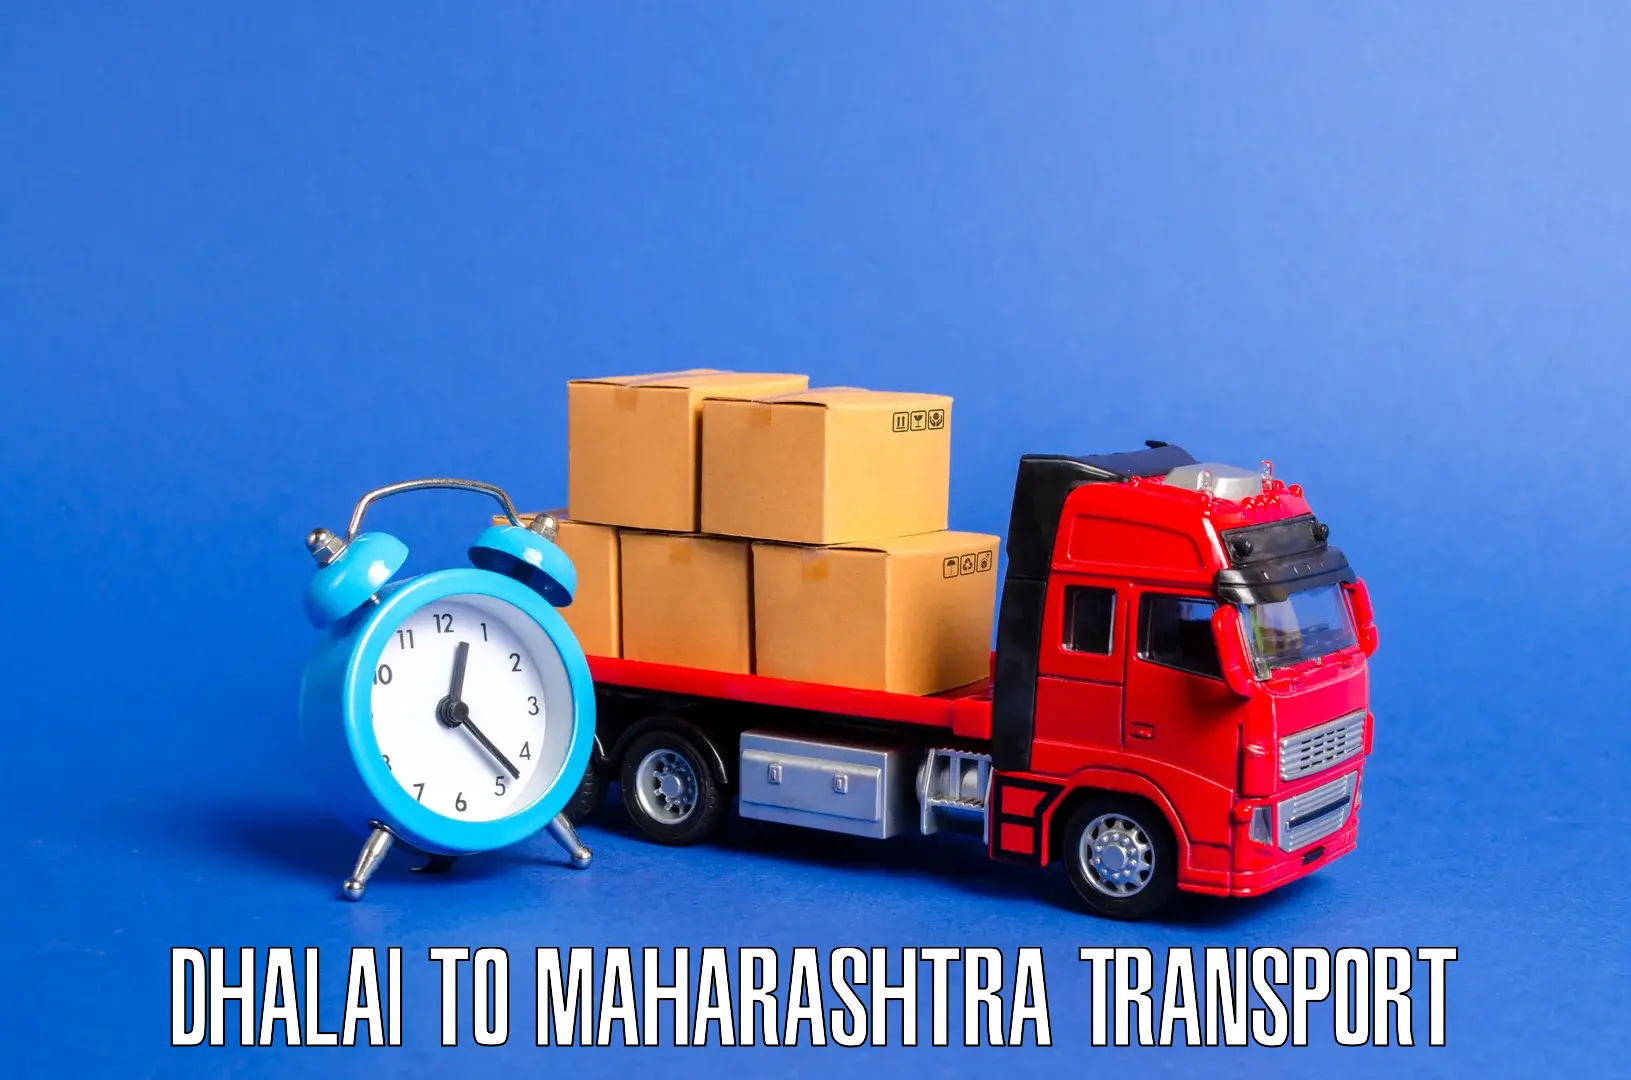 Lorry transport service in Dhalai to Lonar